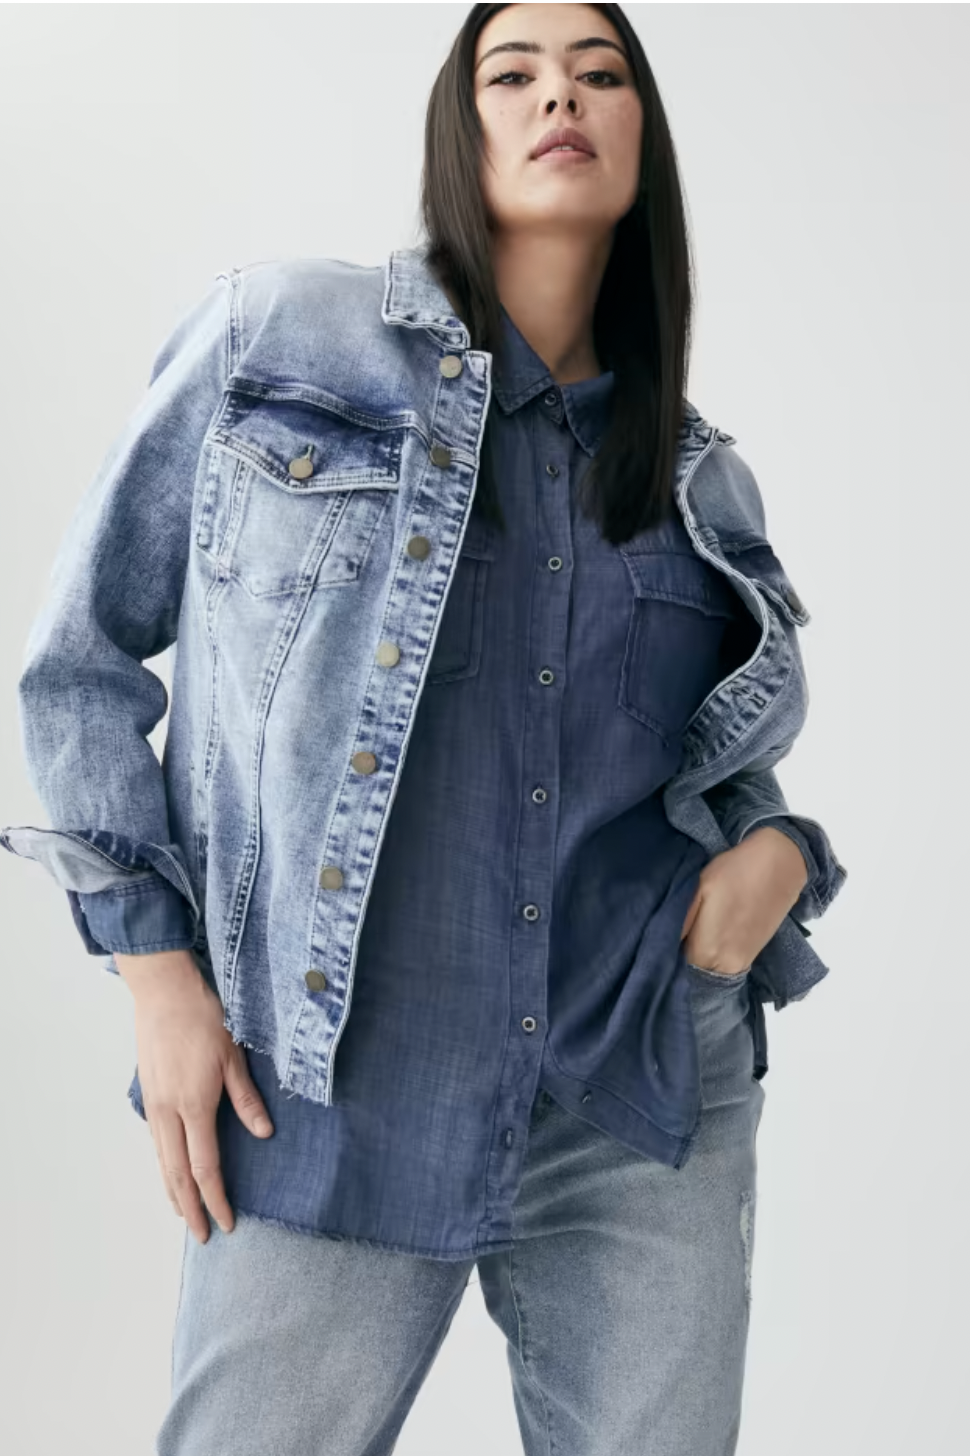 Small Jeans Jacket Xxx Videos - Best Jean Jackets for Women - Denim Jackets to Wear This Fall